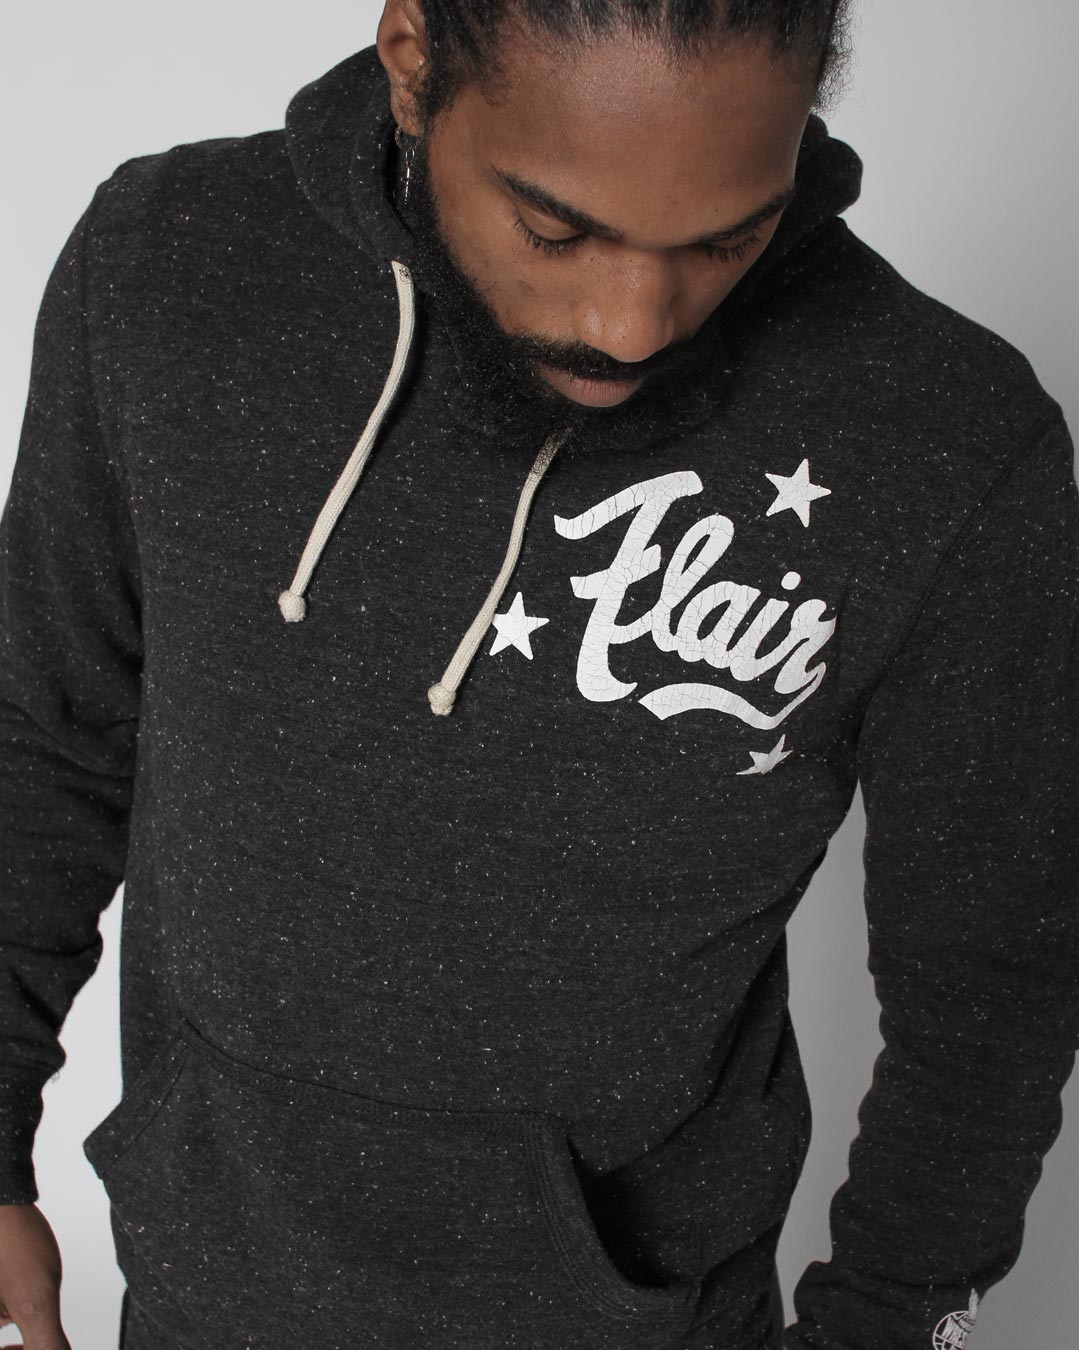 Ric Flair "You're Talking To The" Pullover Hoody - Roots of Fight